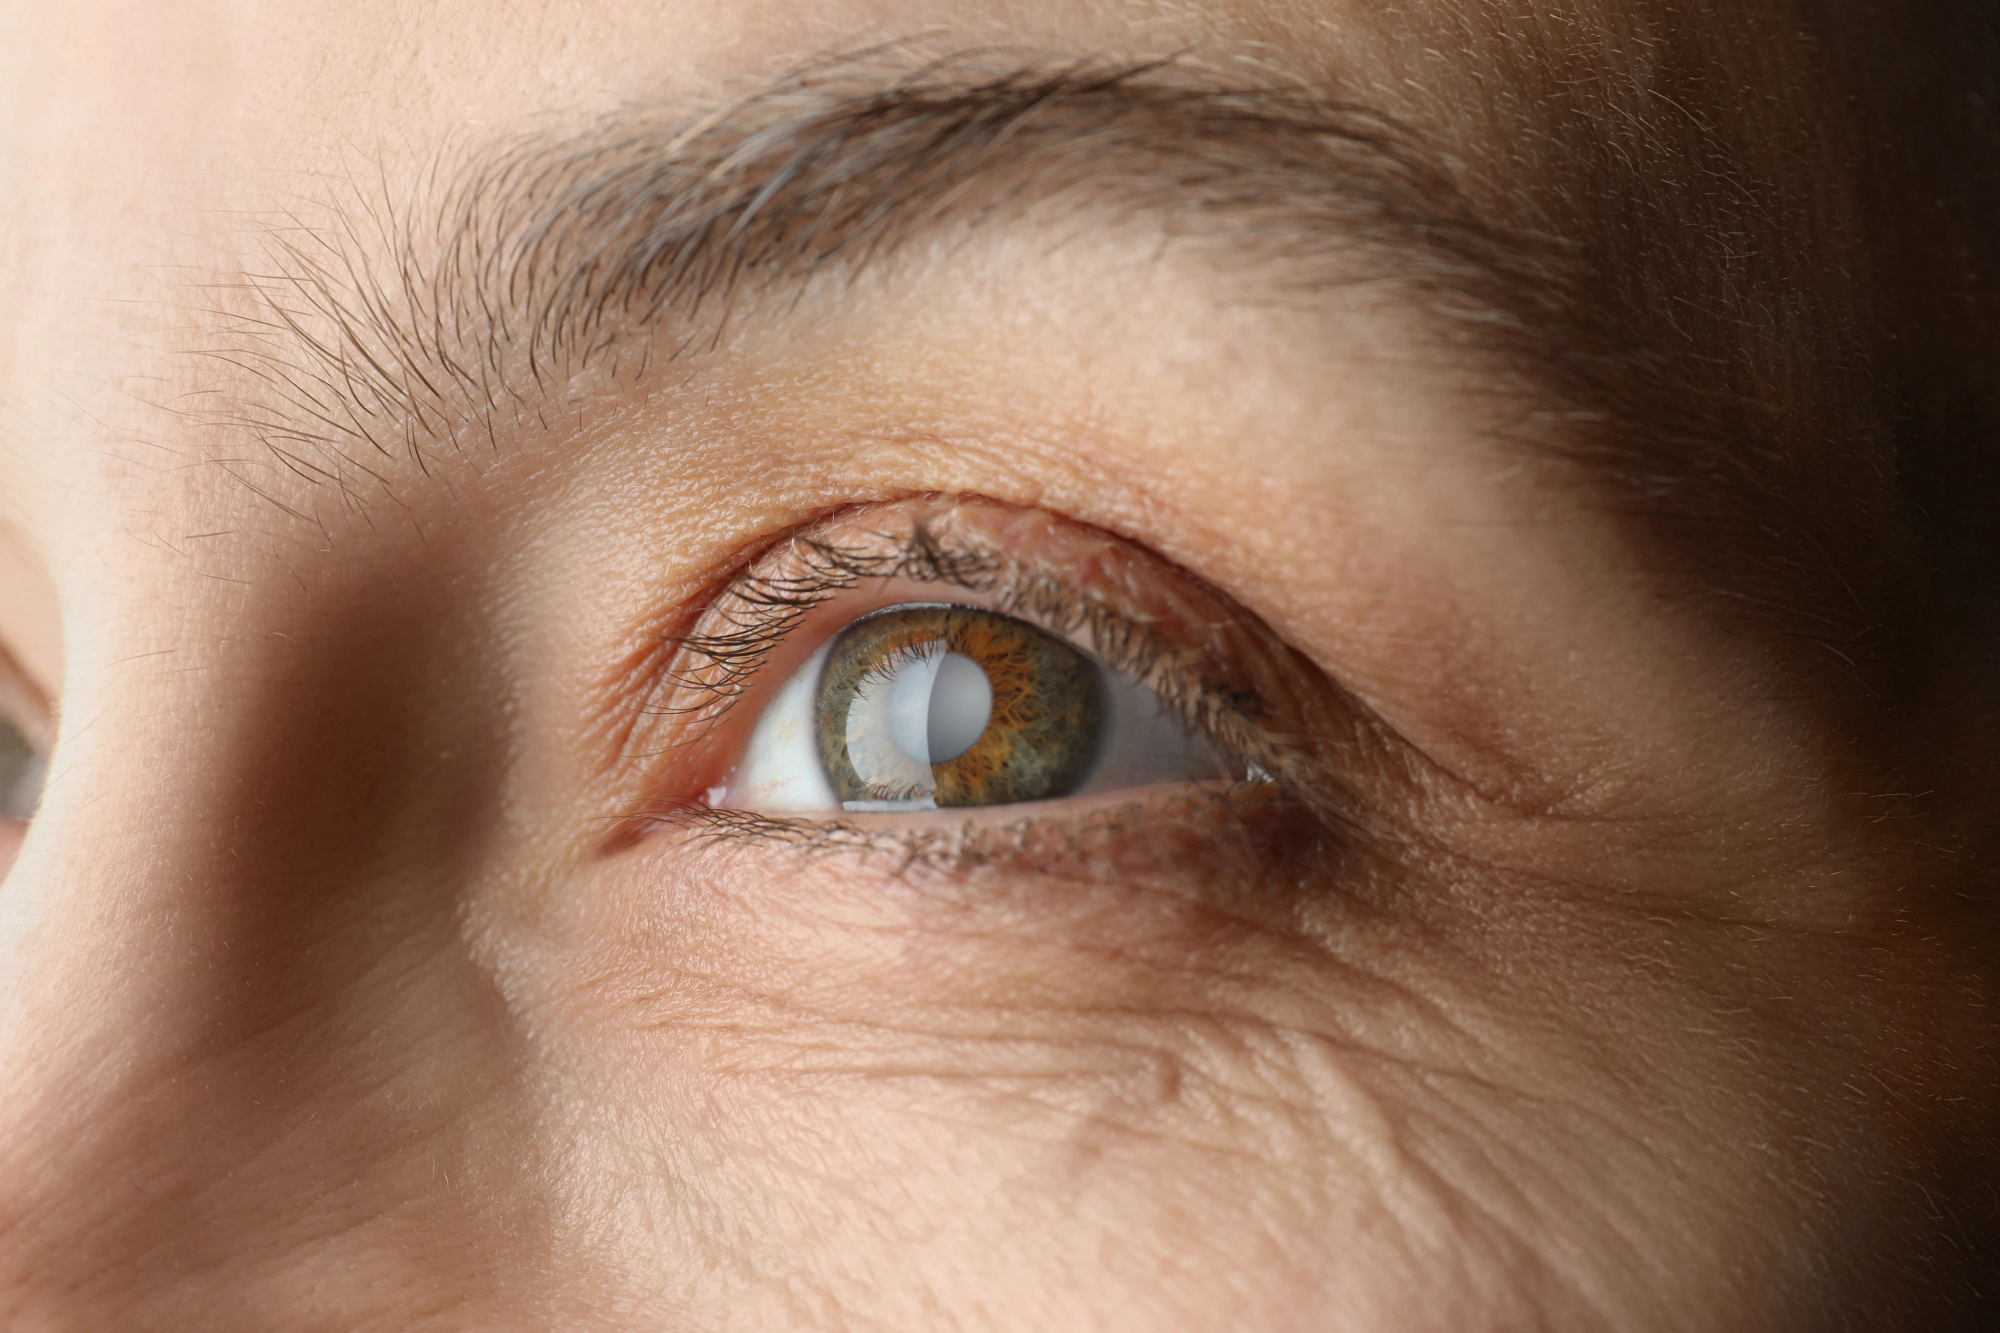 How Do You Know When to Have Cataract Surgery? 